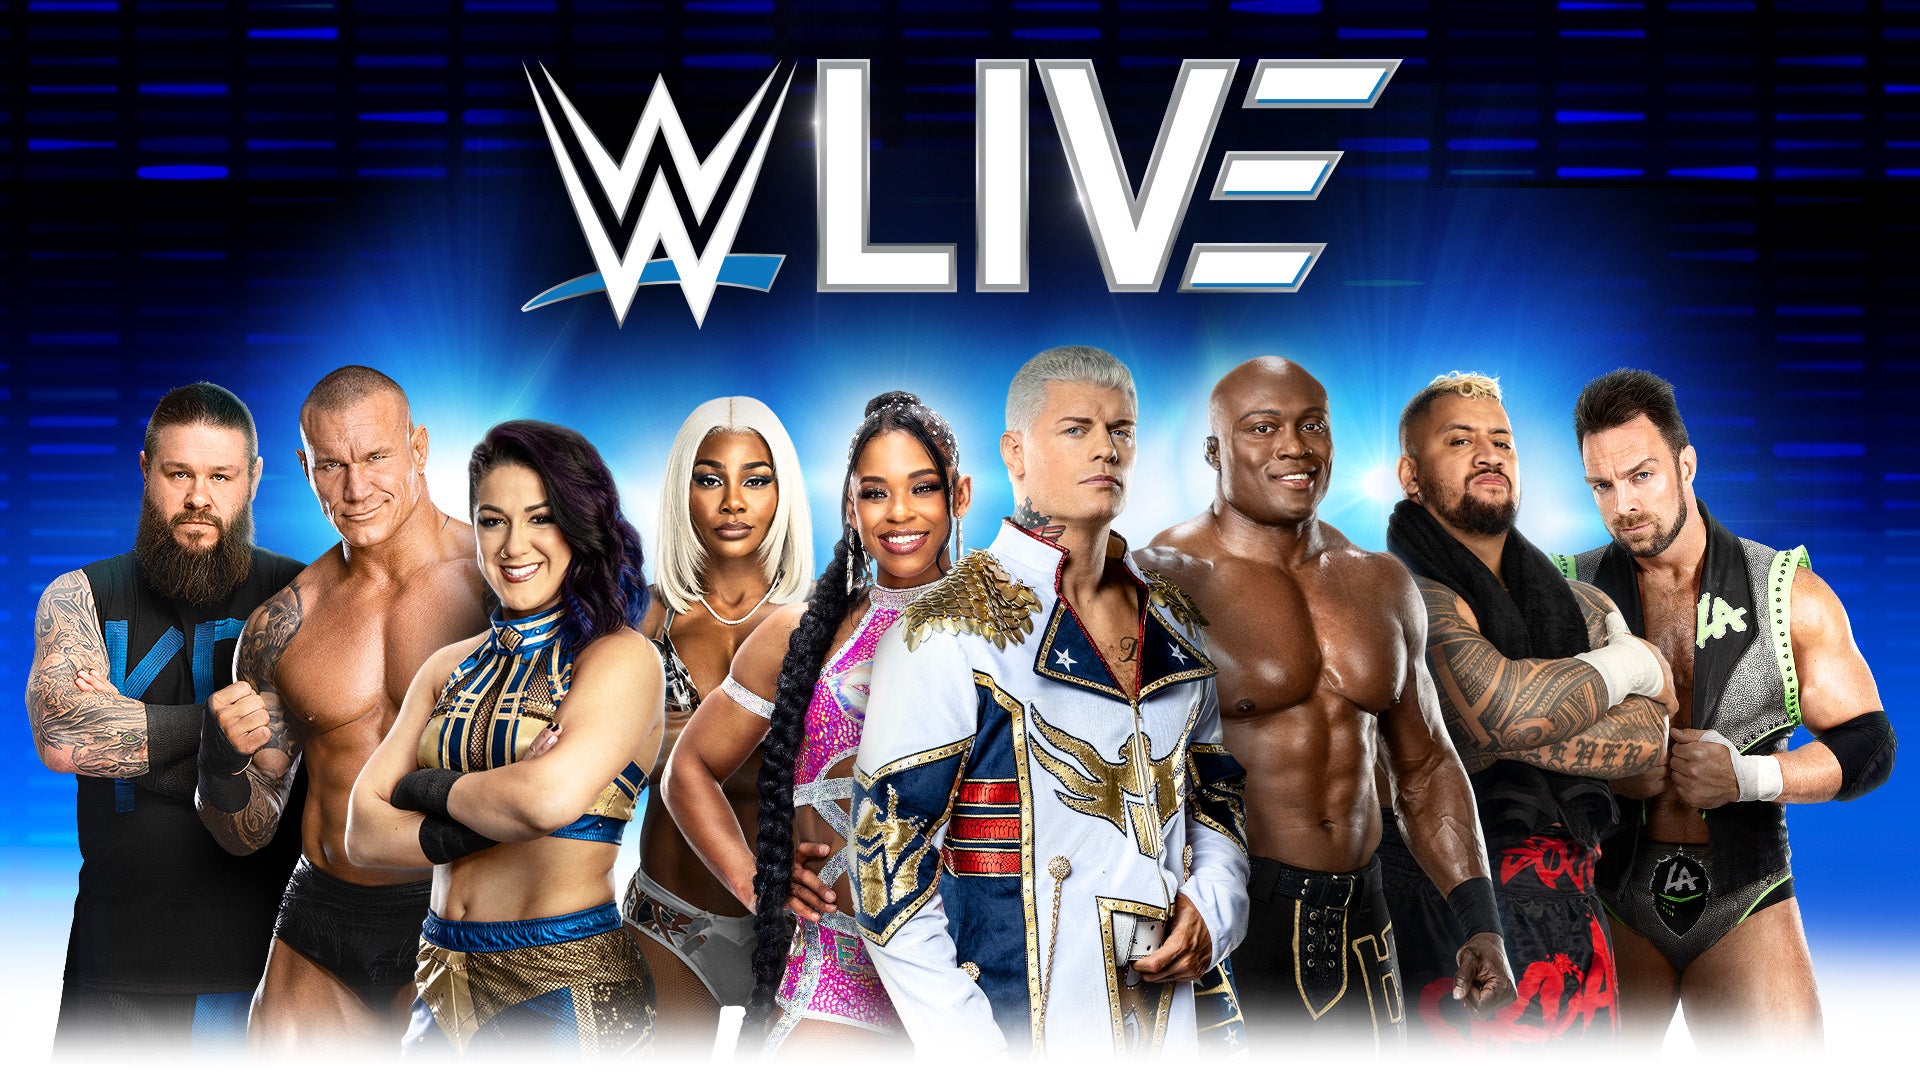 Artwork for WWE Live at The O2